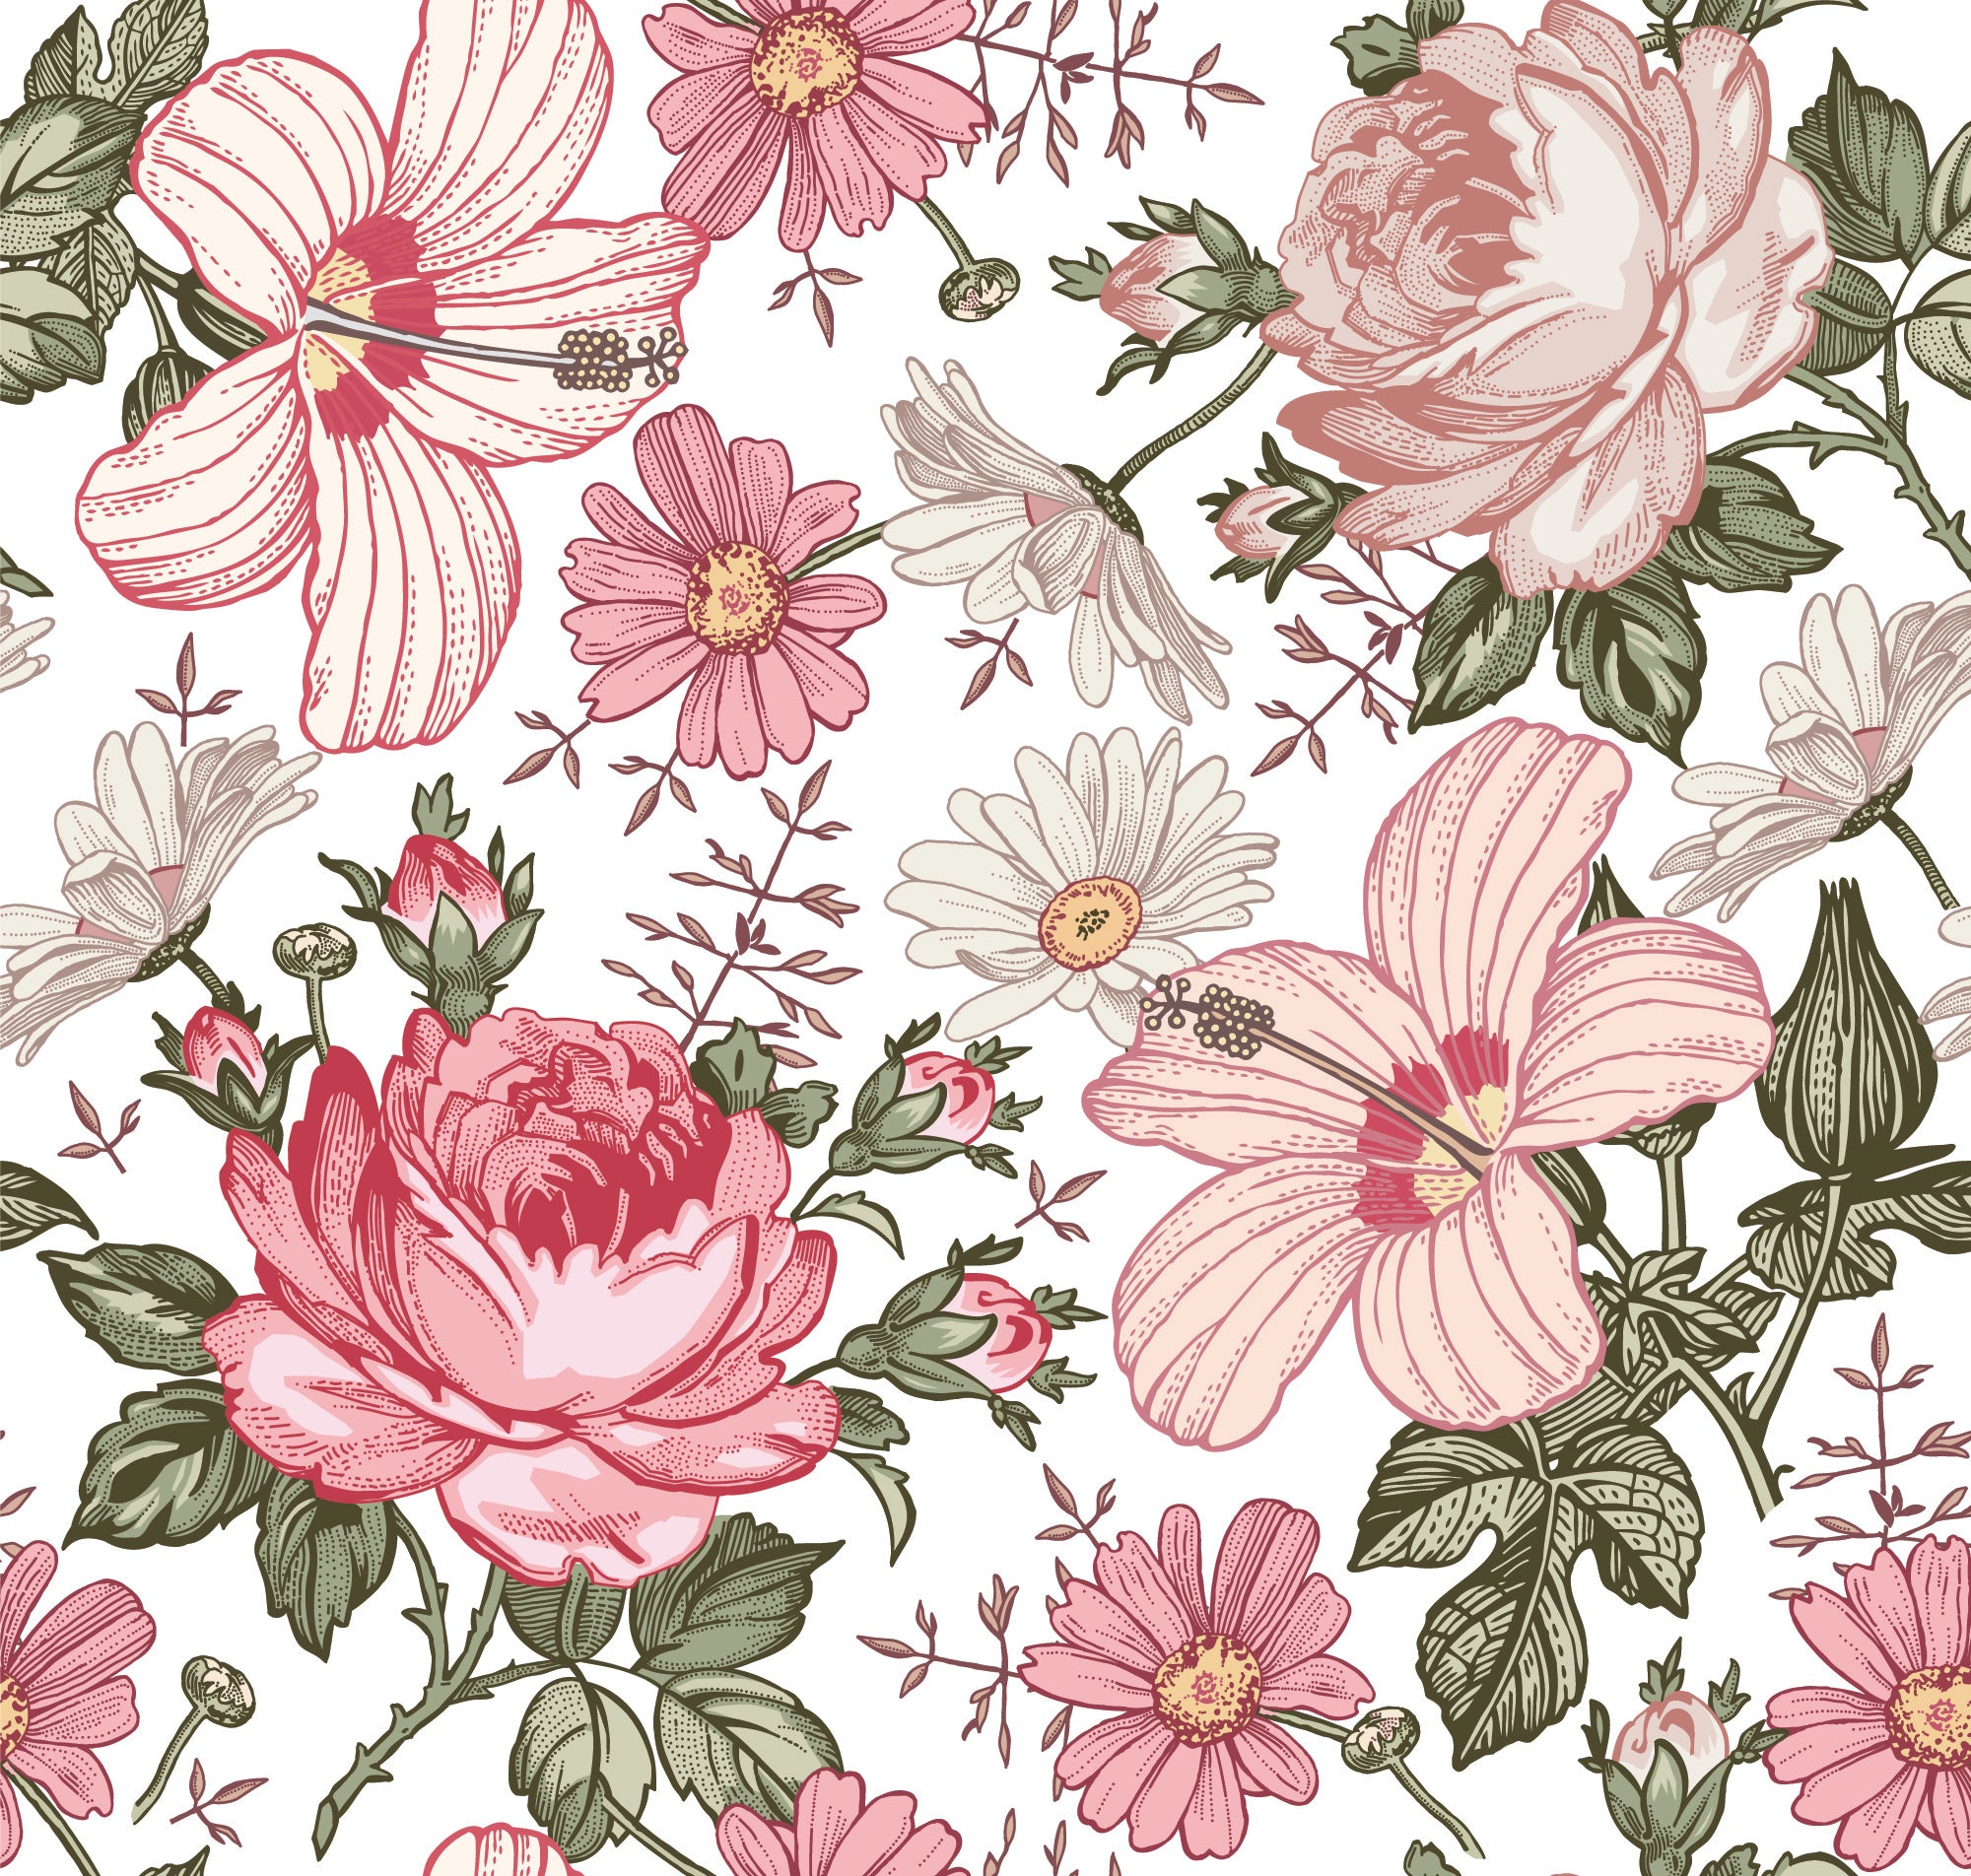 A detailed image of the Floral Wallpaper - Berry Pink, highlighting its intricate and lush botanical print with various flowers in shades of pink, ranging from soft pastels to deep berry hues, set against a white background.